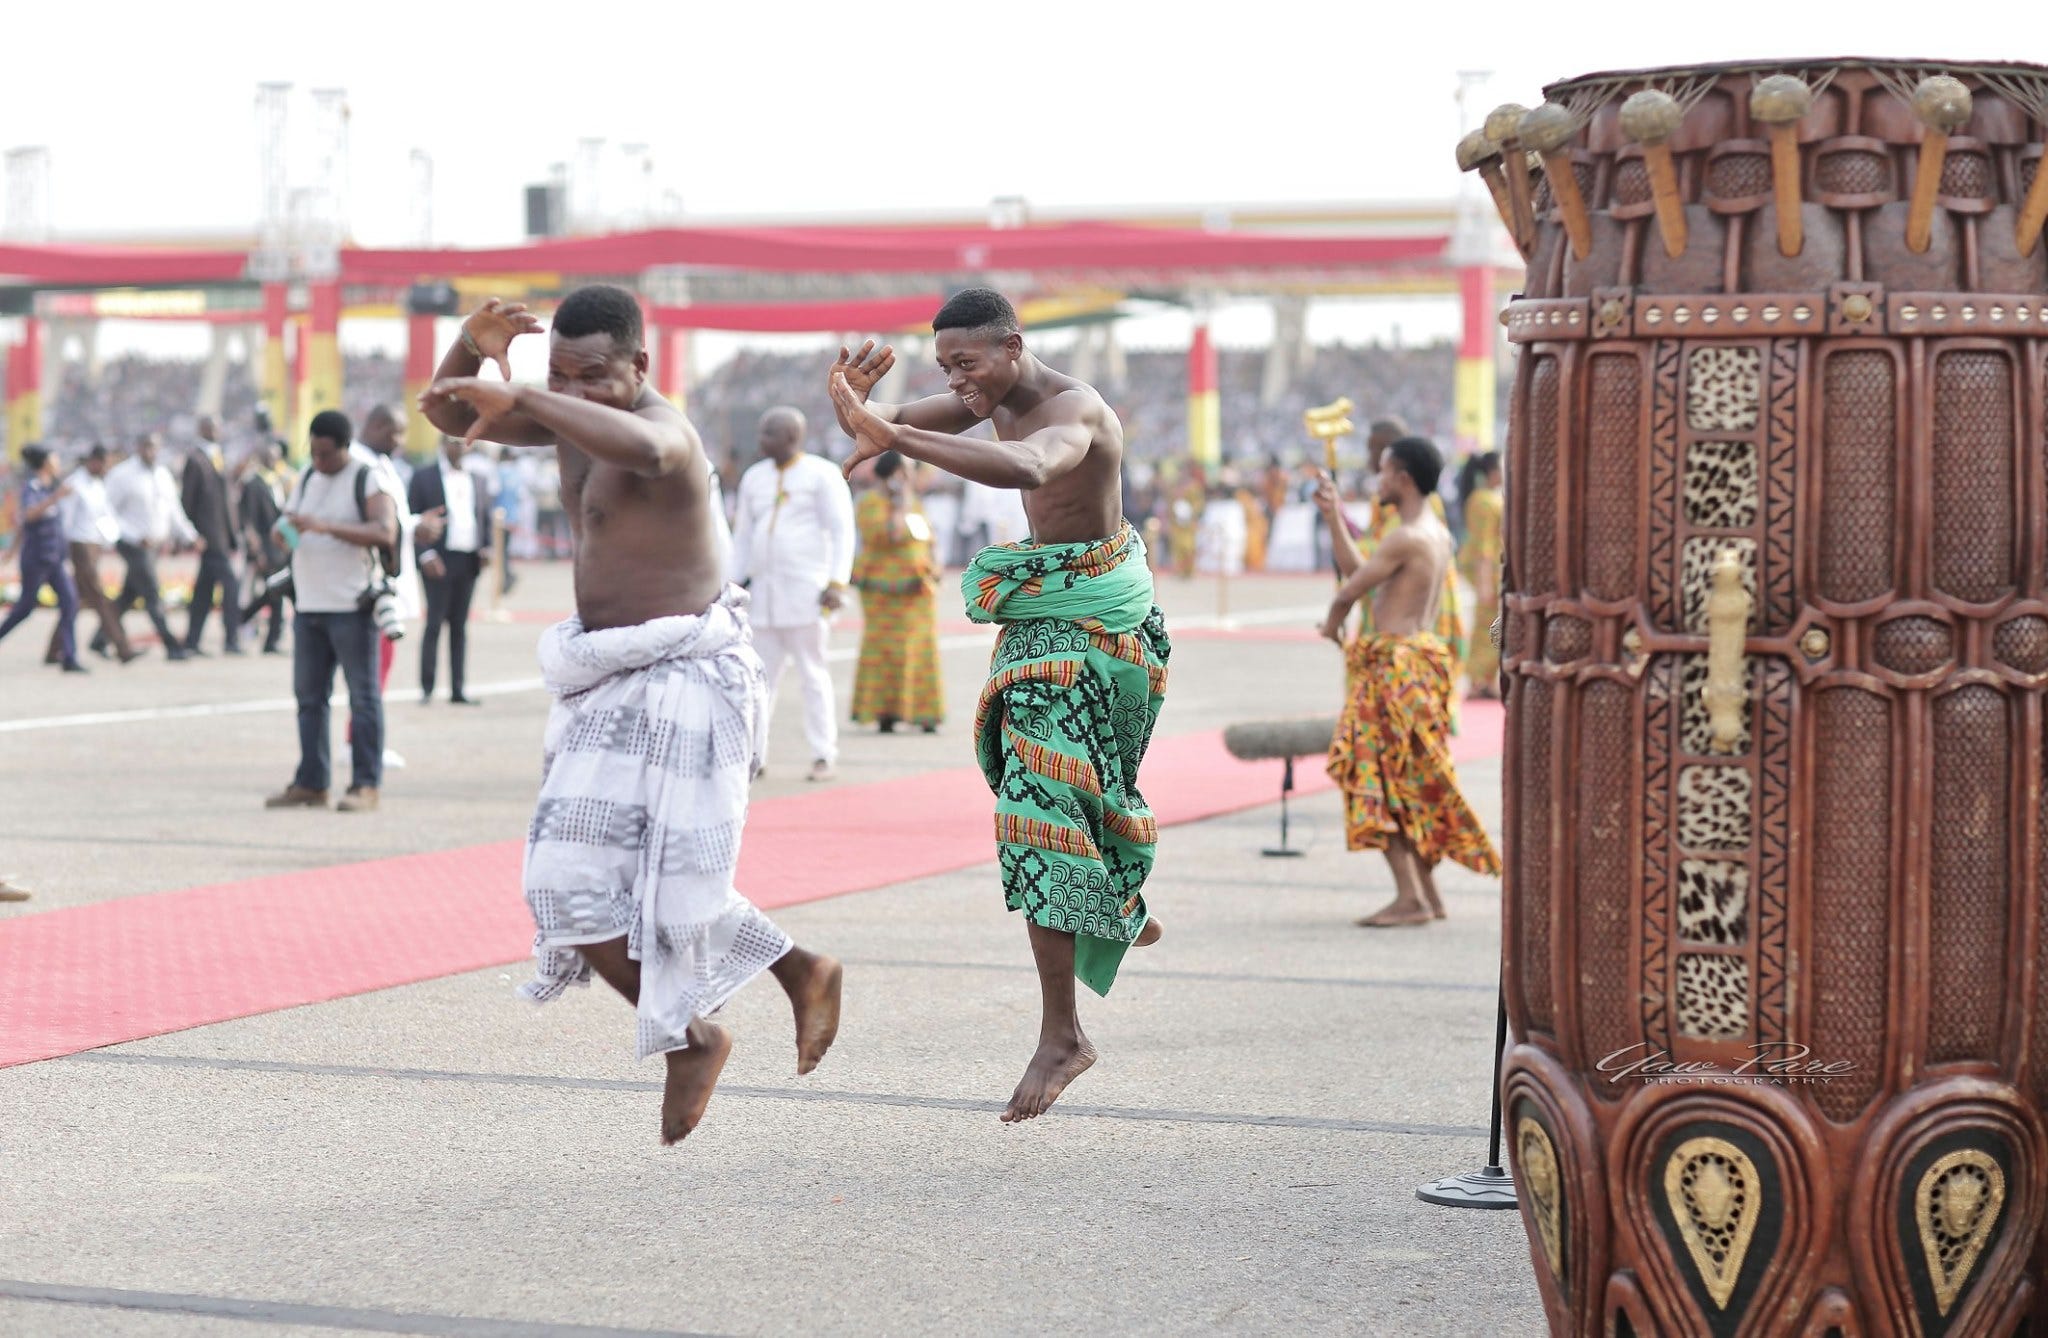 Ghana Month: Historical meanings of traditional dances